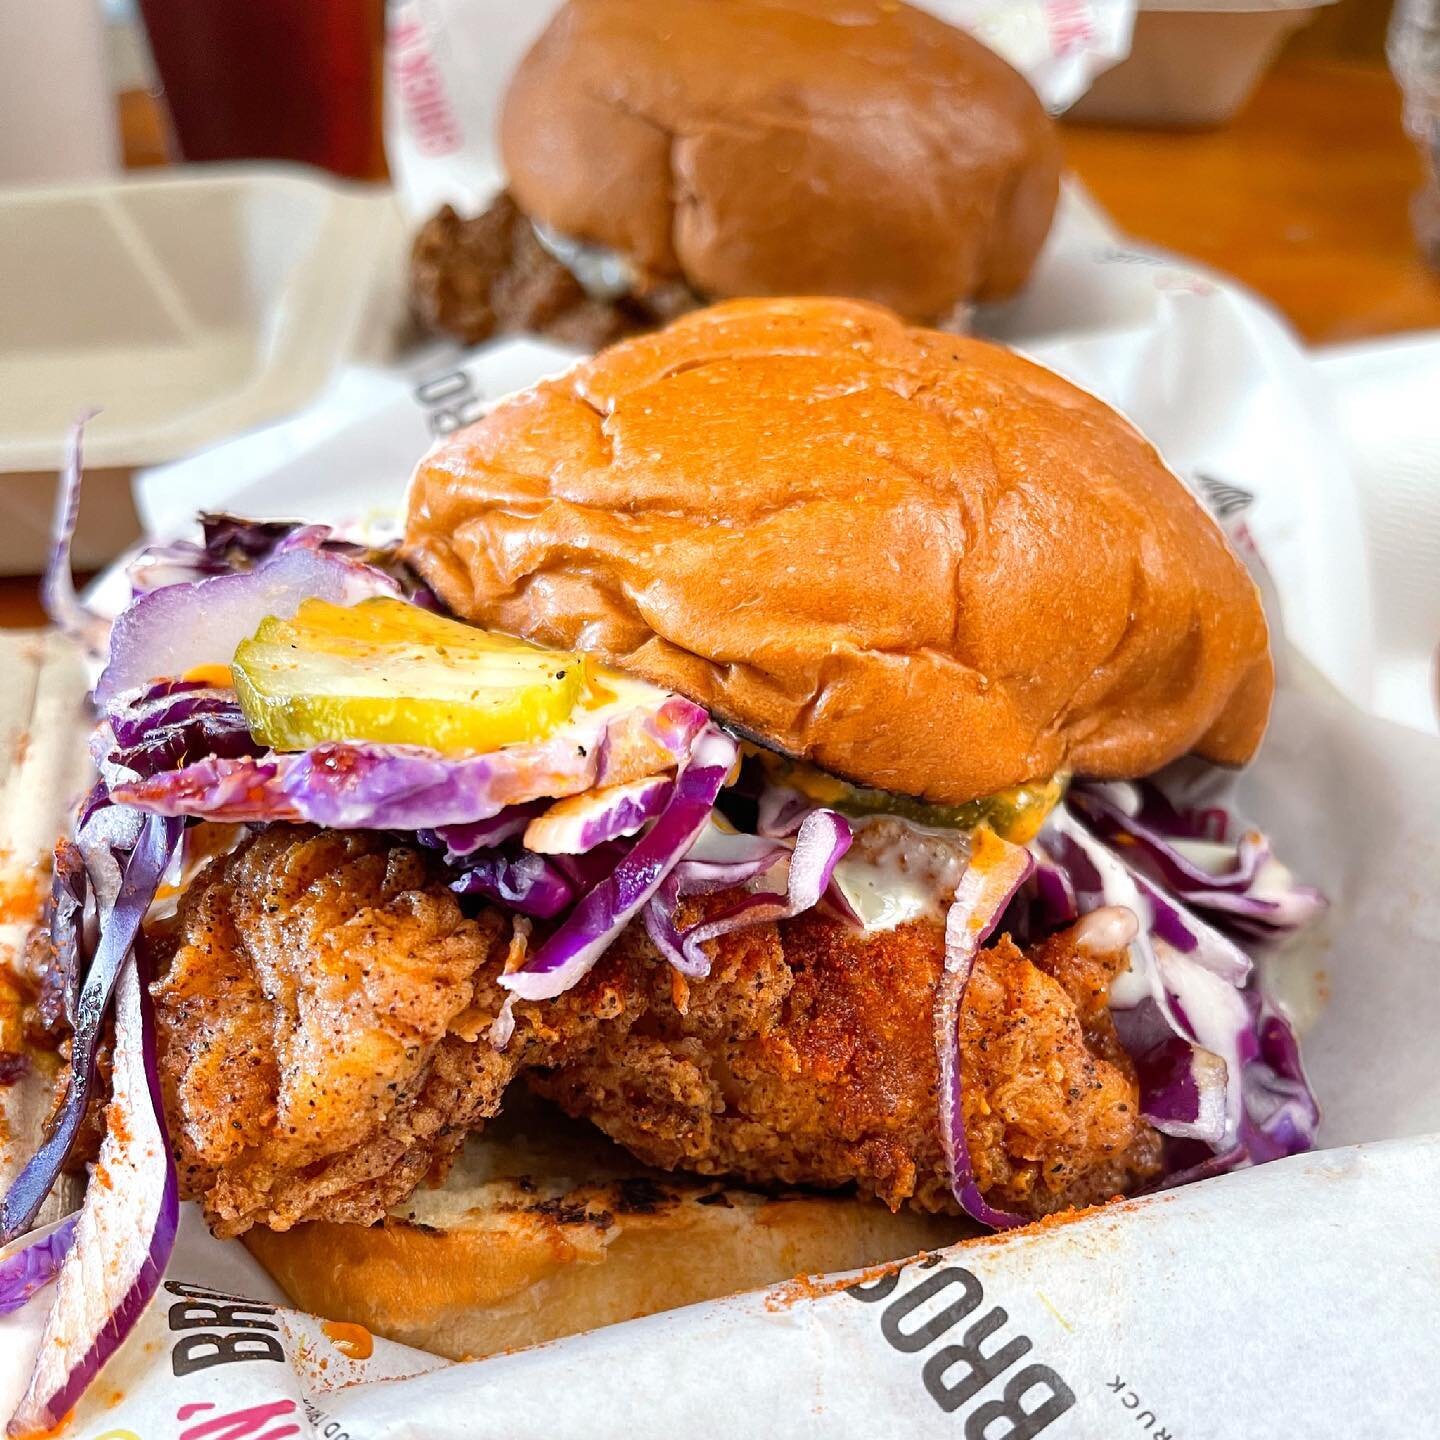 📍San Jose, CA @chicknbros.sj 
Say hello to this Nashville Fire - beer battered fried chicken with an orange spicy adobo aioli sauce, white tangy sauce, onions, pickles, purple cabbage, paprika, chili oil, and honey all on a brioche bun. 

I&rsquo;m 